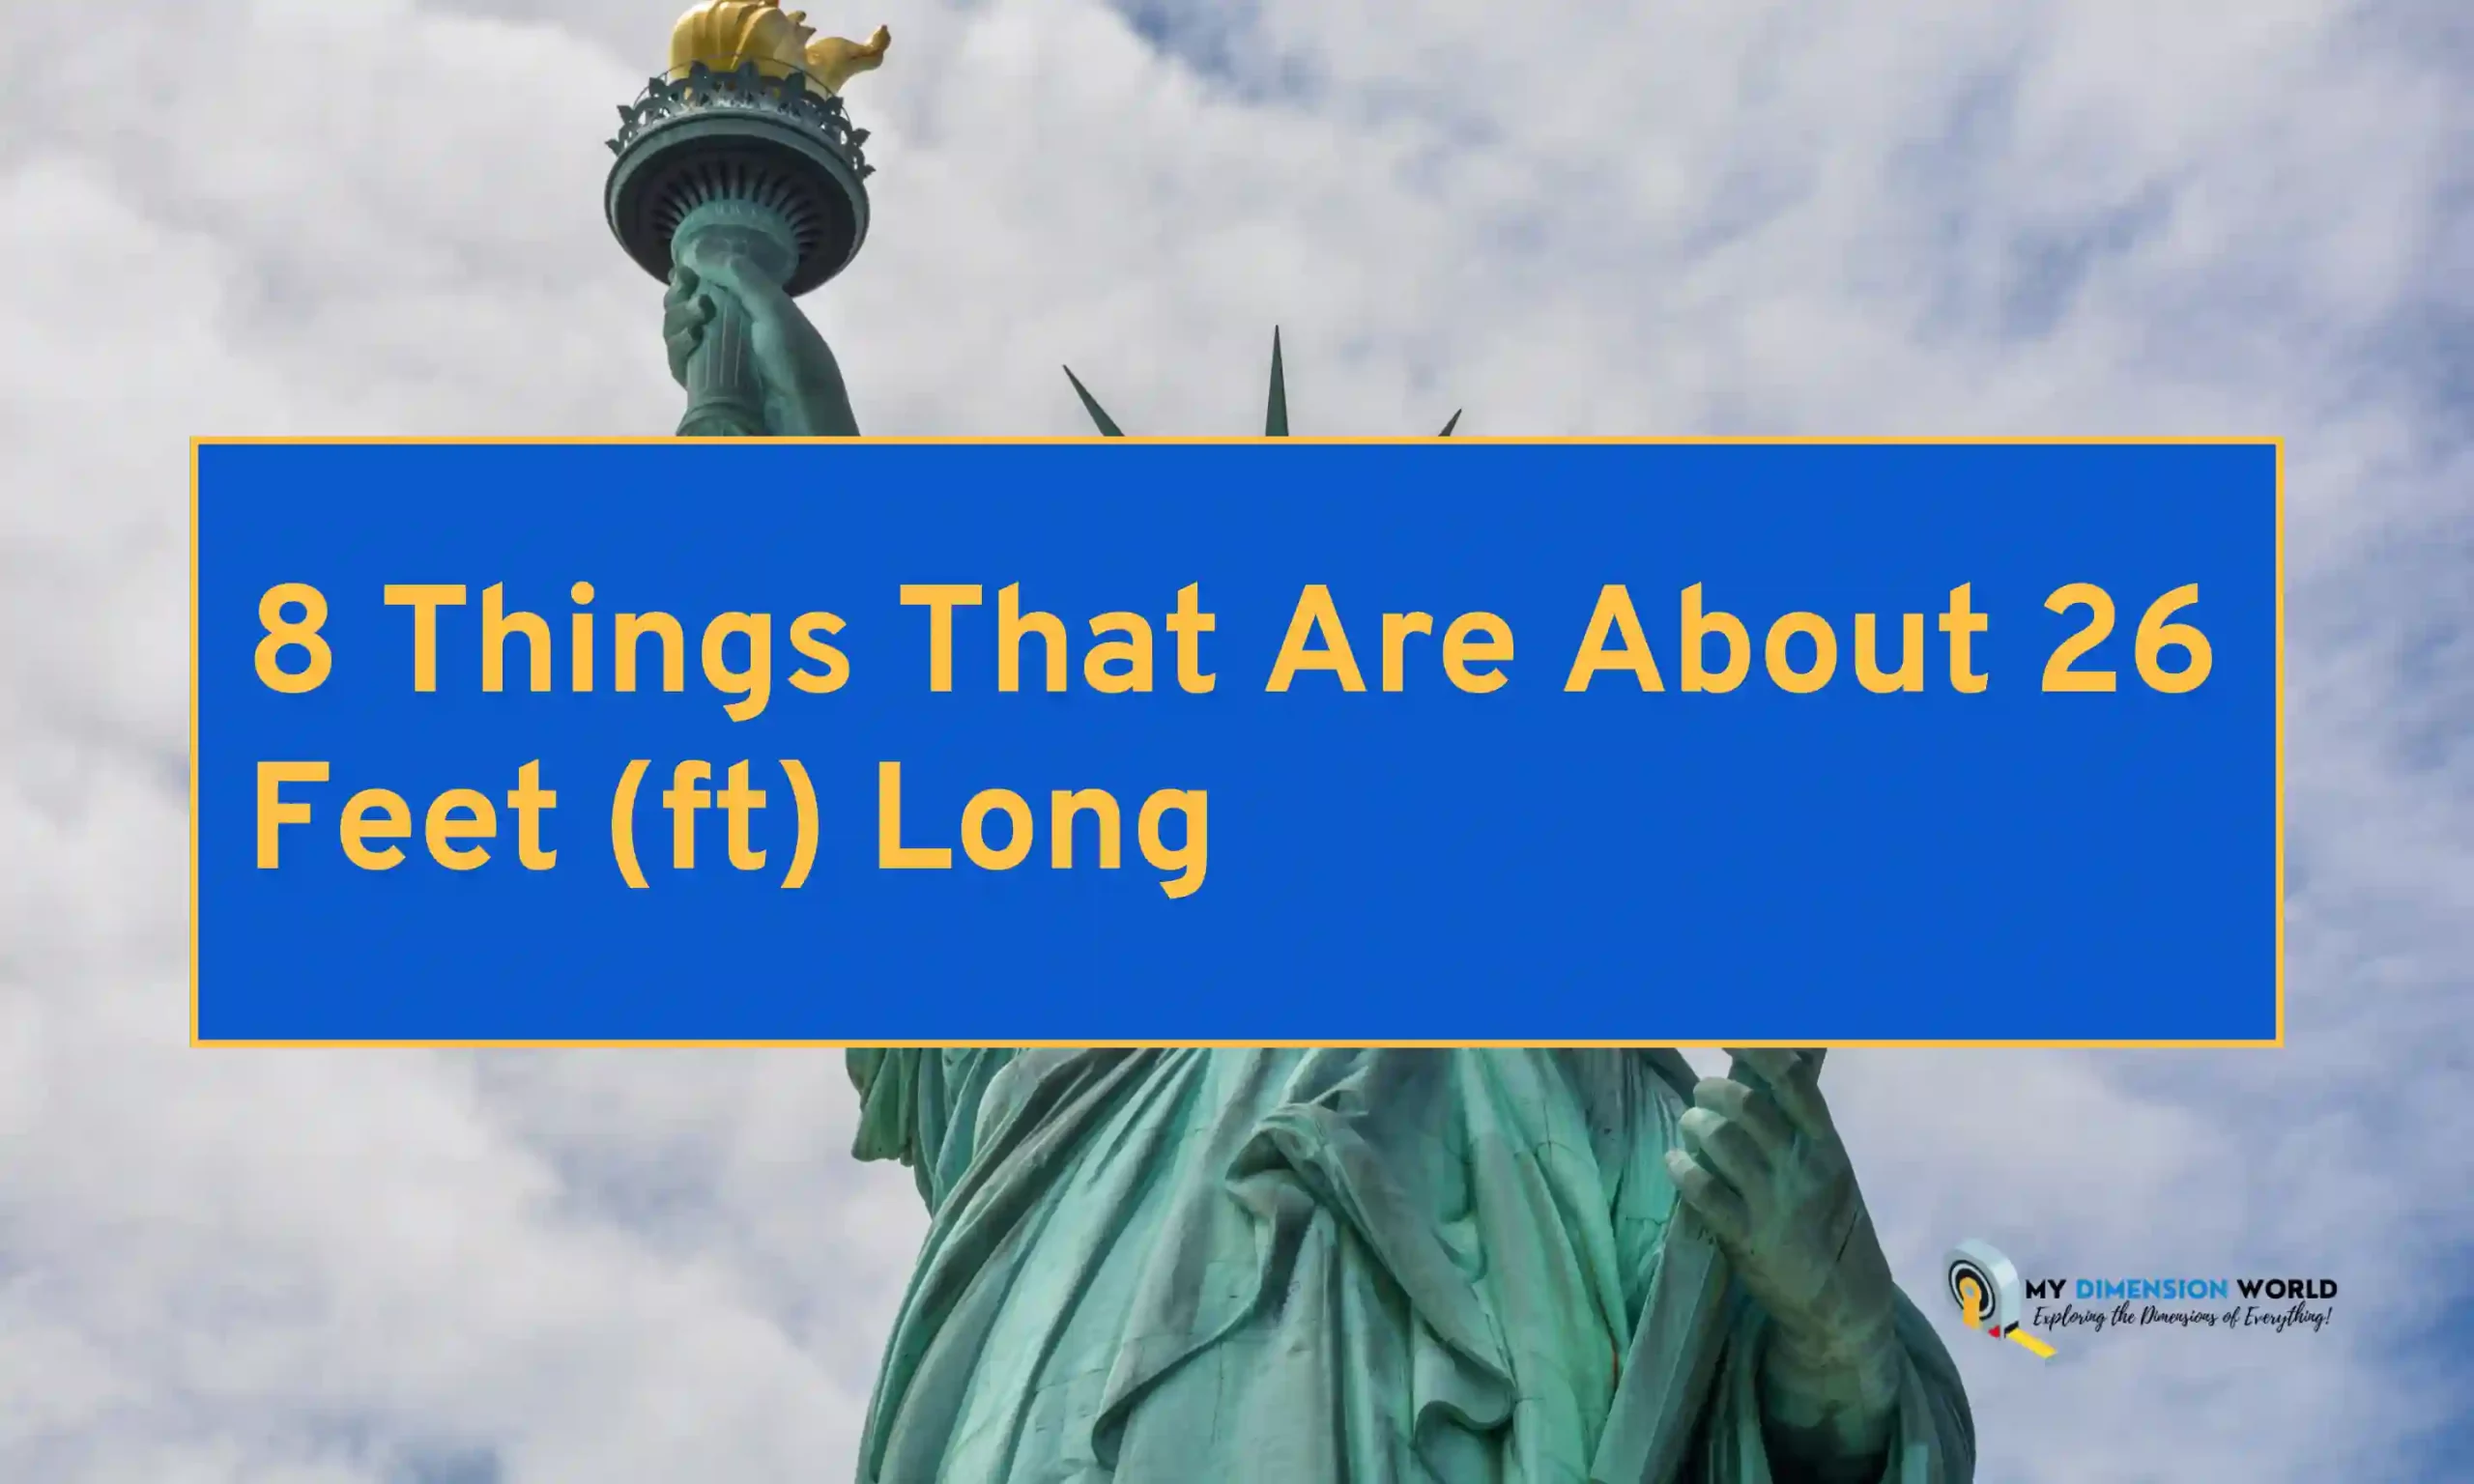 8 Things That Are About 26 Feet (ft) Long